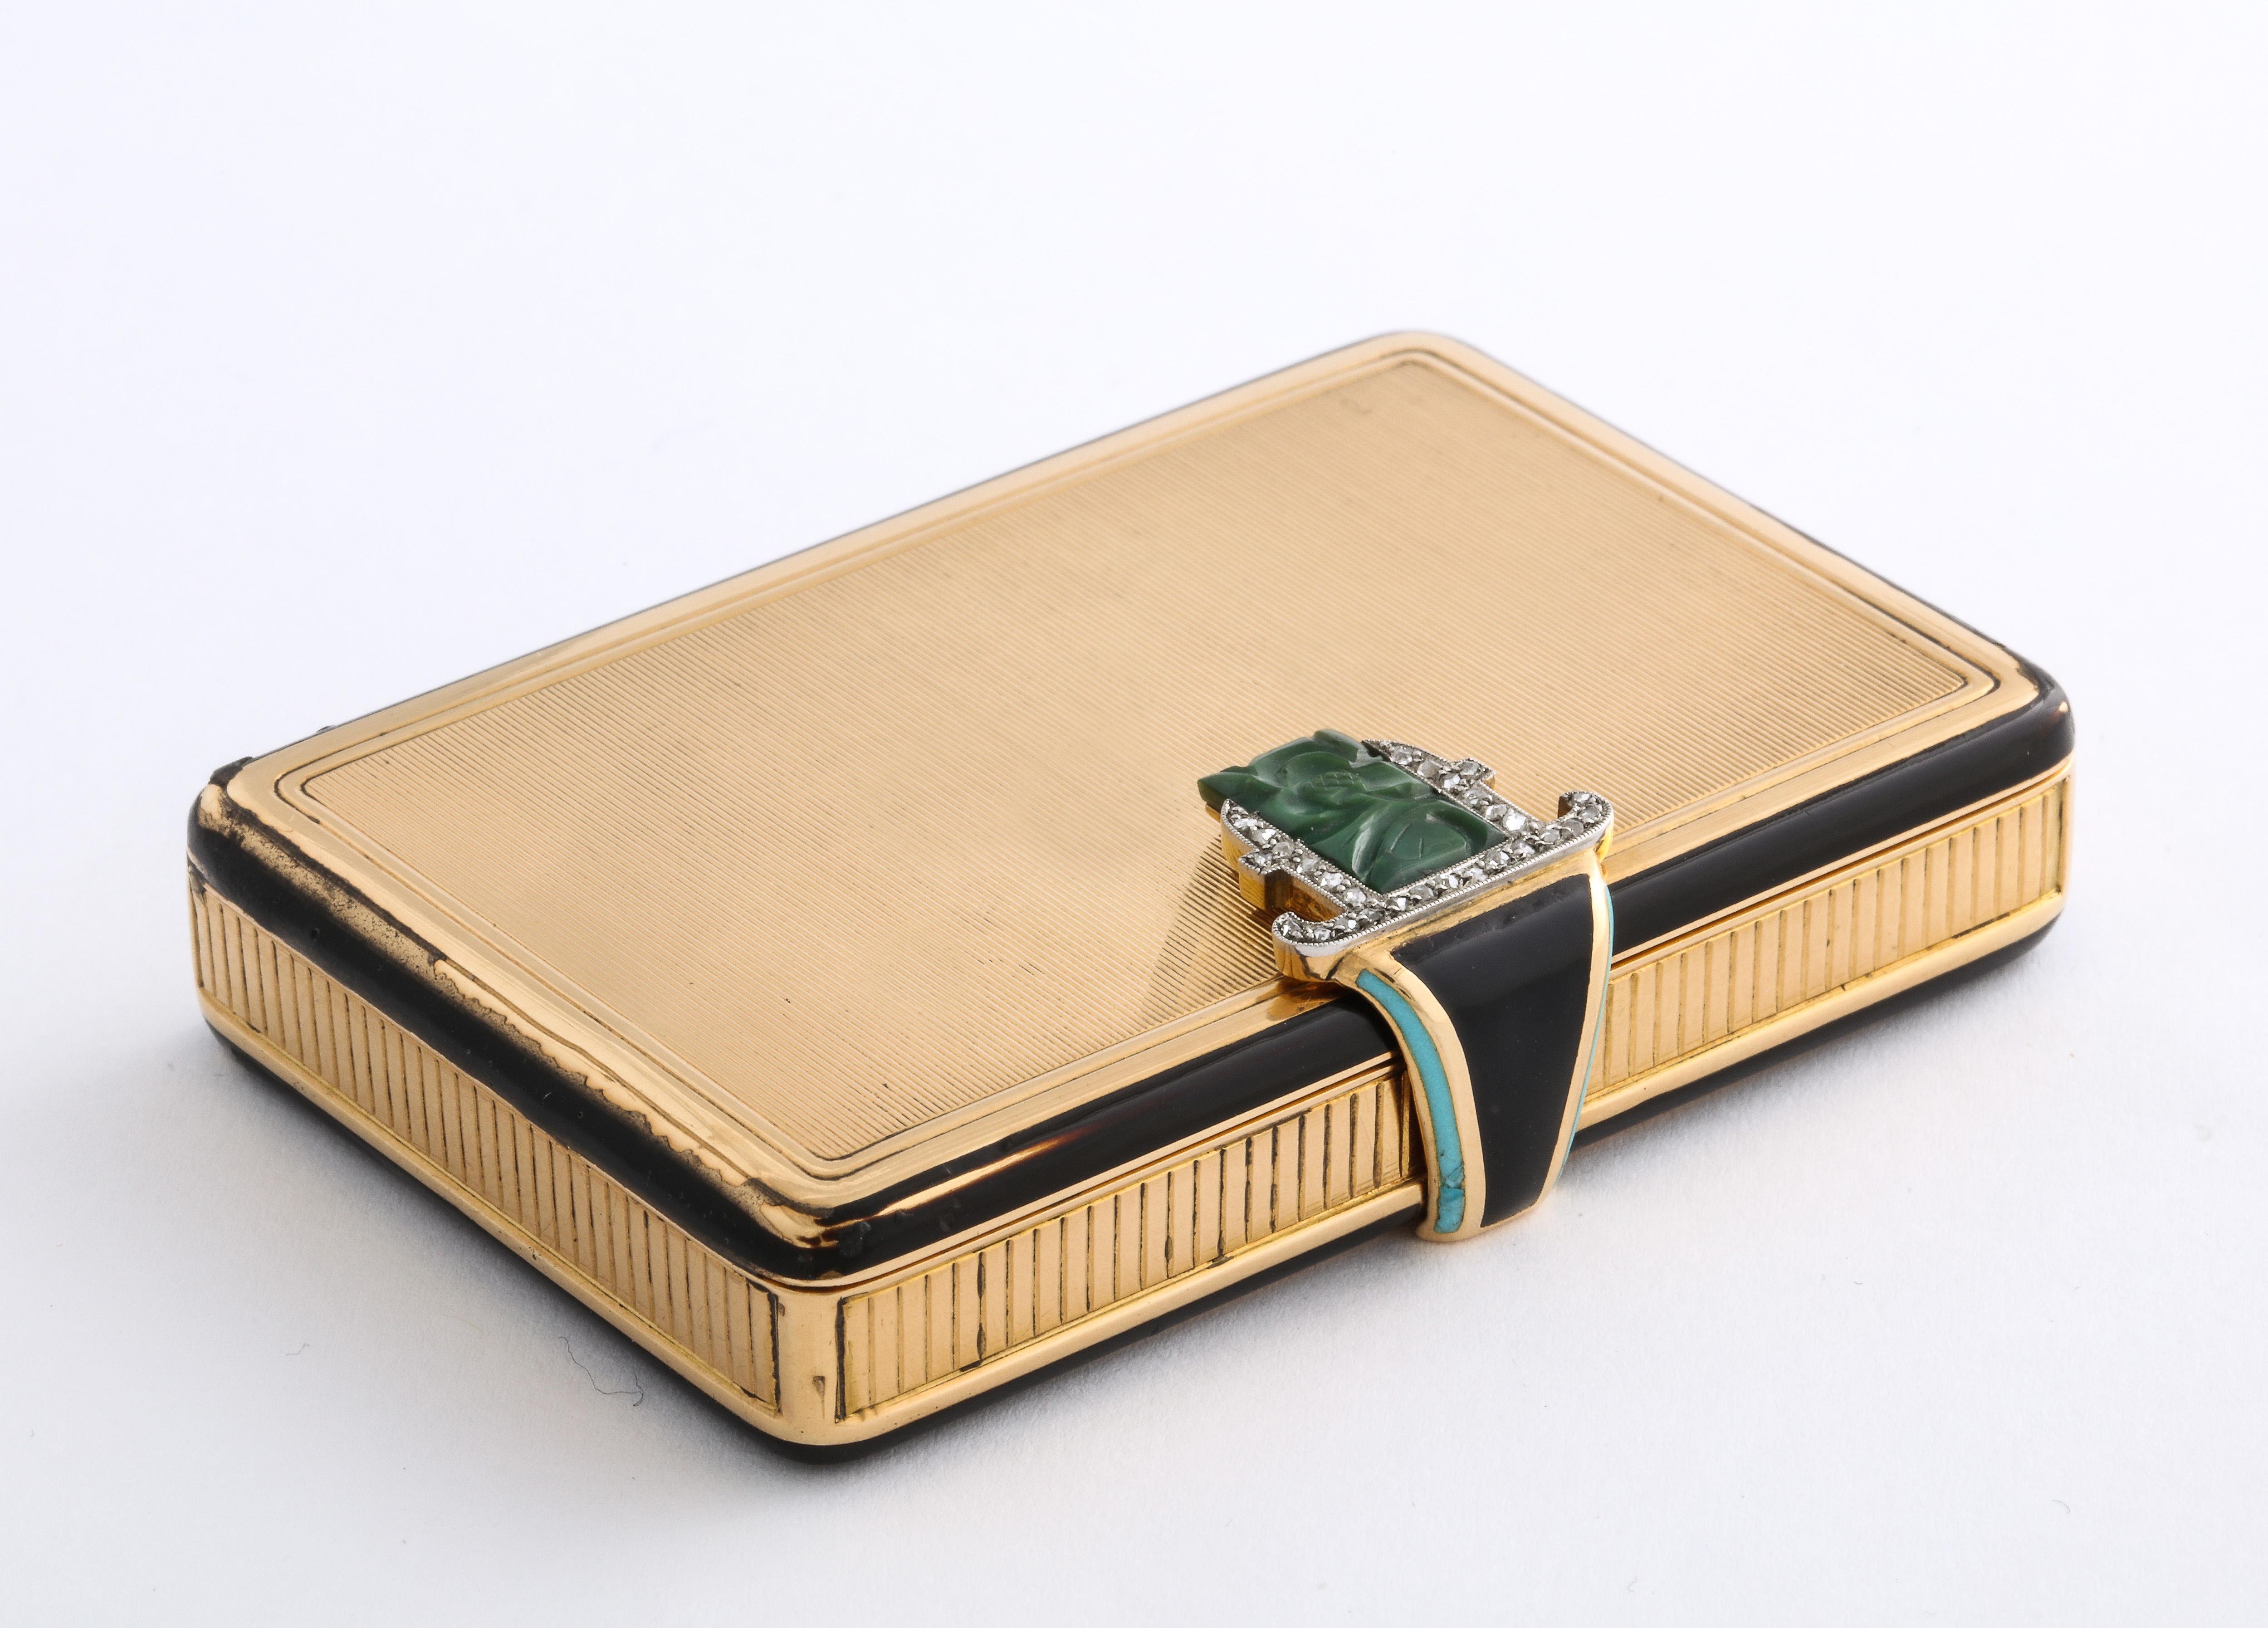 1930's Handsome 18k Gold Cartier Compact, with Carved Jade and Diamond Clasp.

Marked: 750 for 18k Gold
Numbered: 08429 w/ French Hallmarks
121 Grams of 18k Gold
Black Enamel throughout with Diamonds and Carved Green Jade
Measures: 2 ½ x 1 ¾ x ½ inch